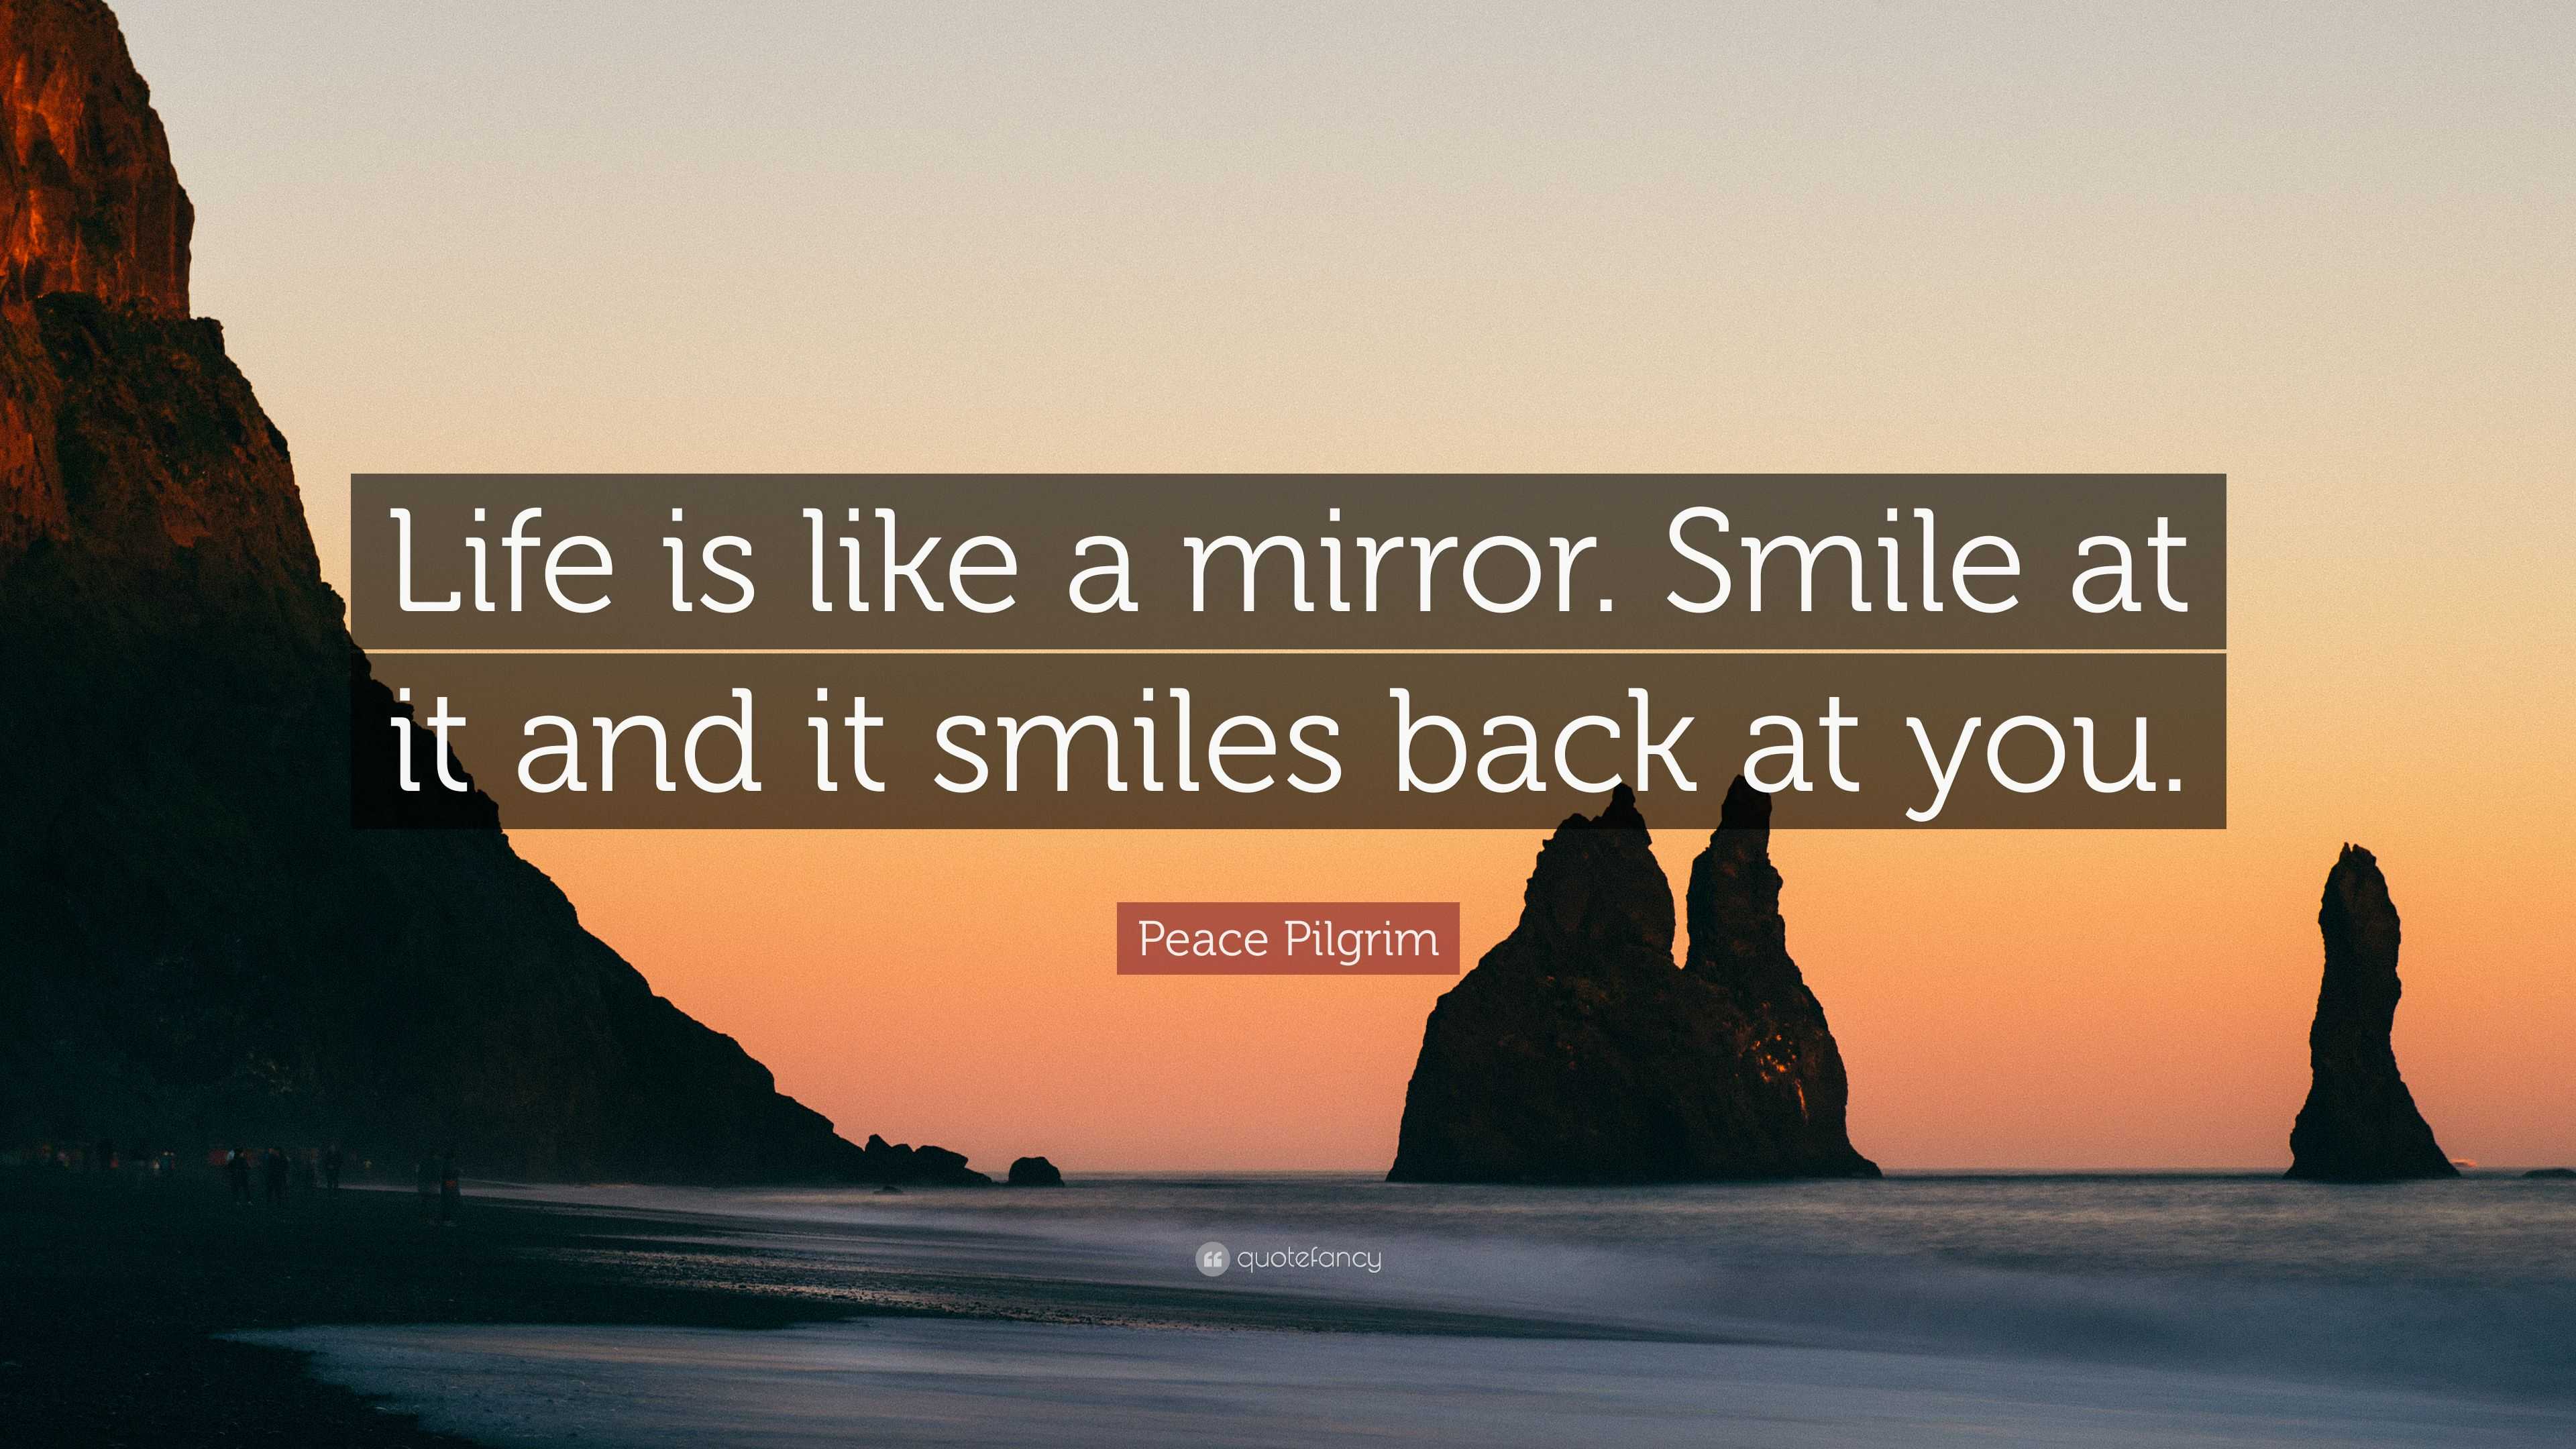 Peace Pilgrim Quote “Life is like a mirror Smile at it and it